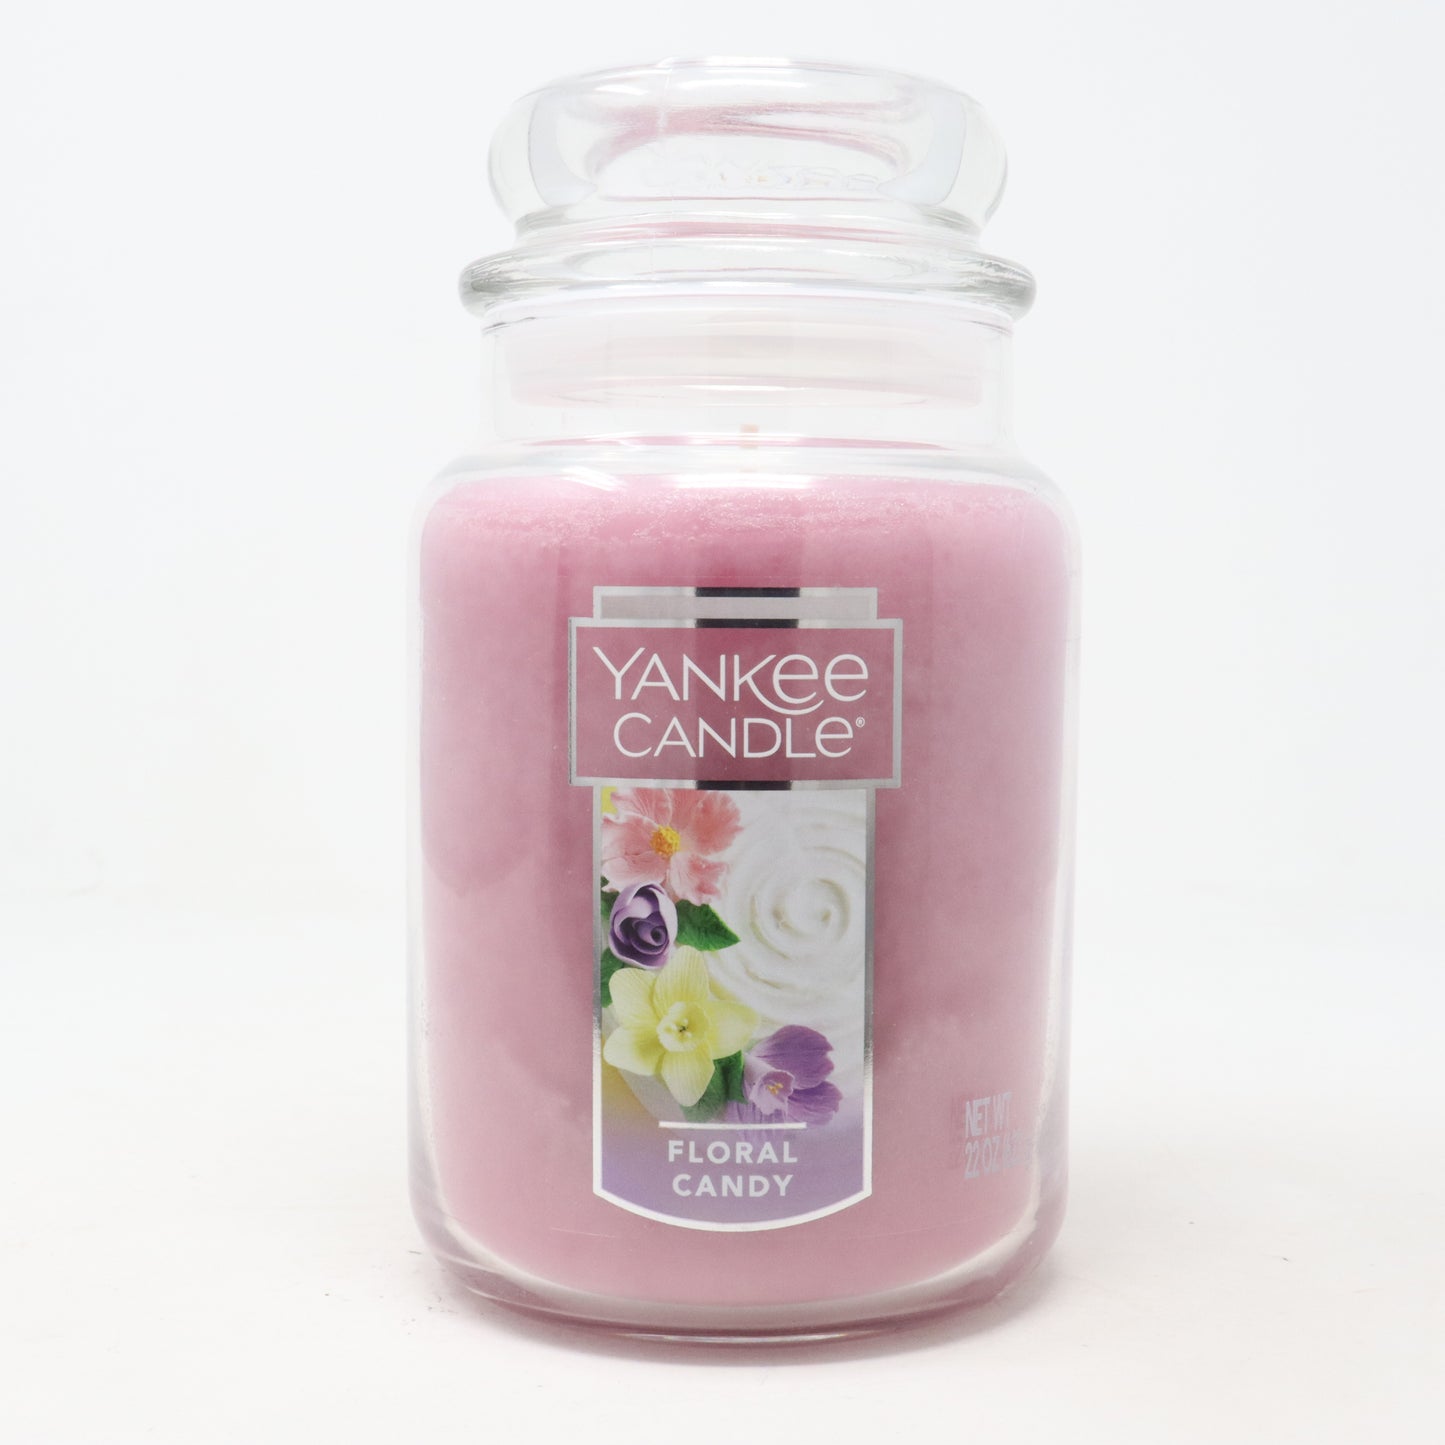 Floral Candy Large Jar Candles 623.7 g